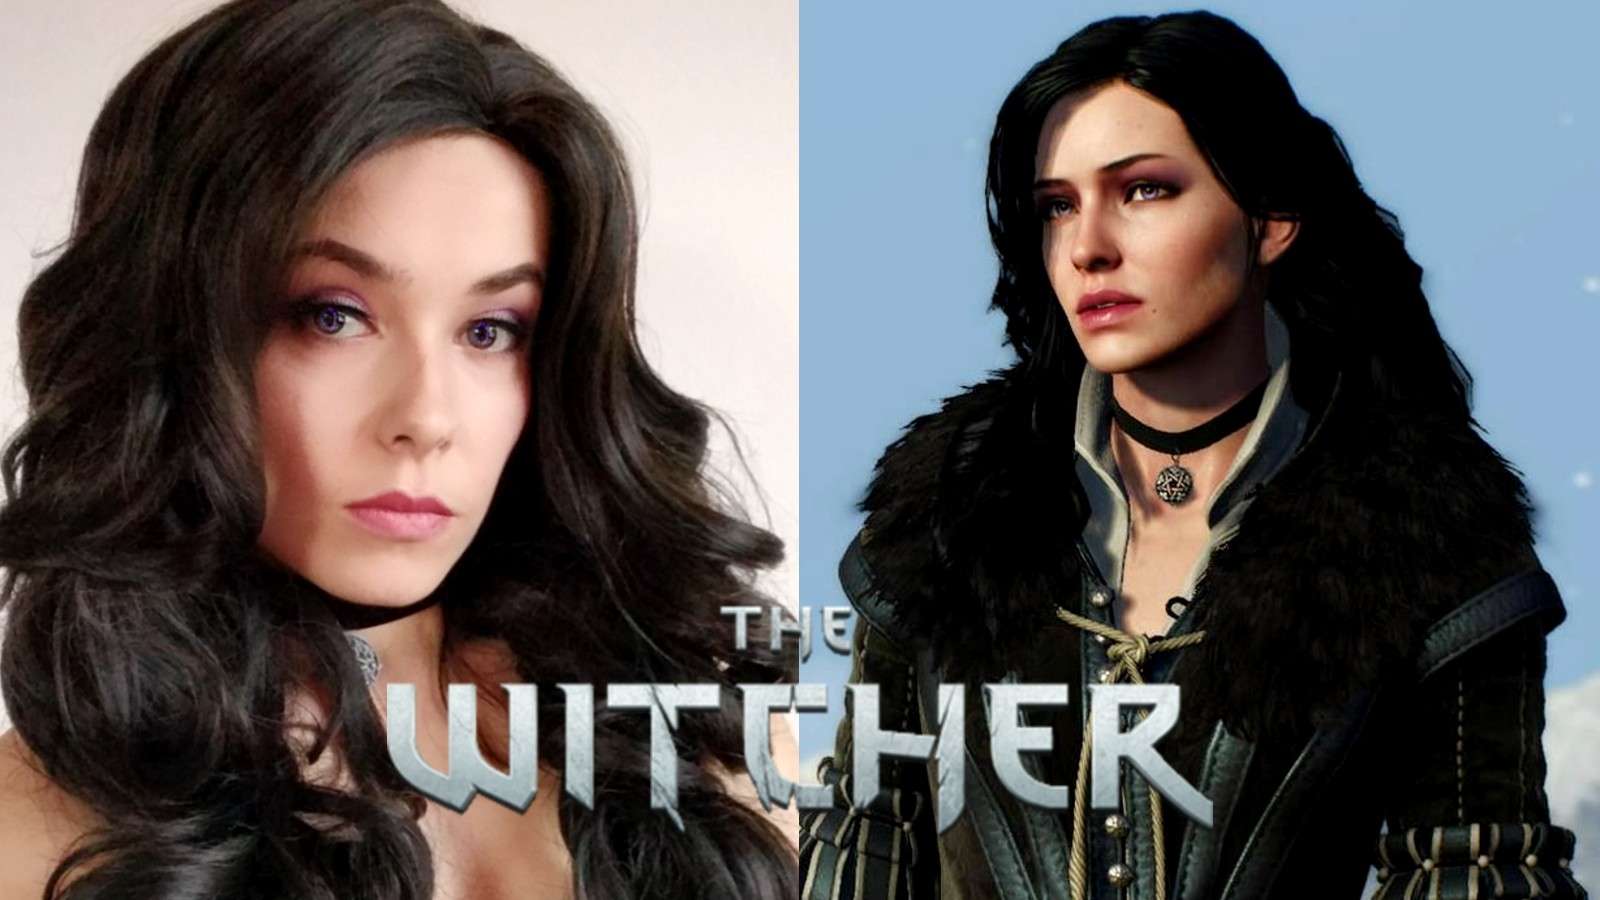 Cosplayer DariaSol next to Yennefer from The Witcher